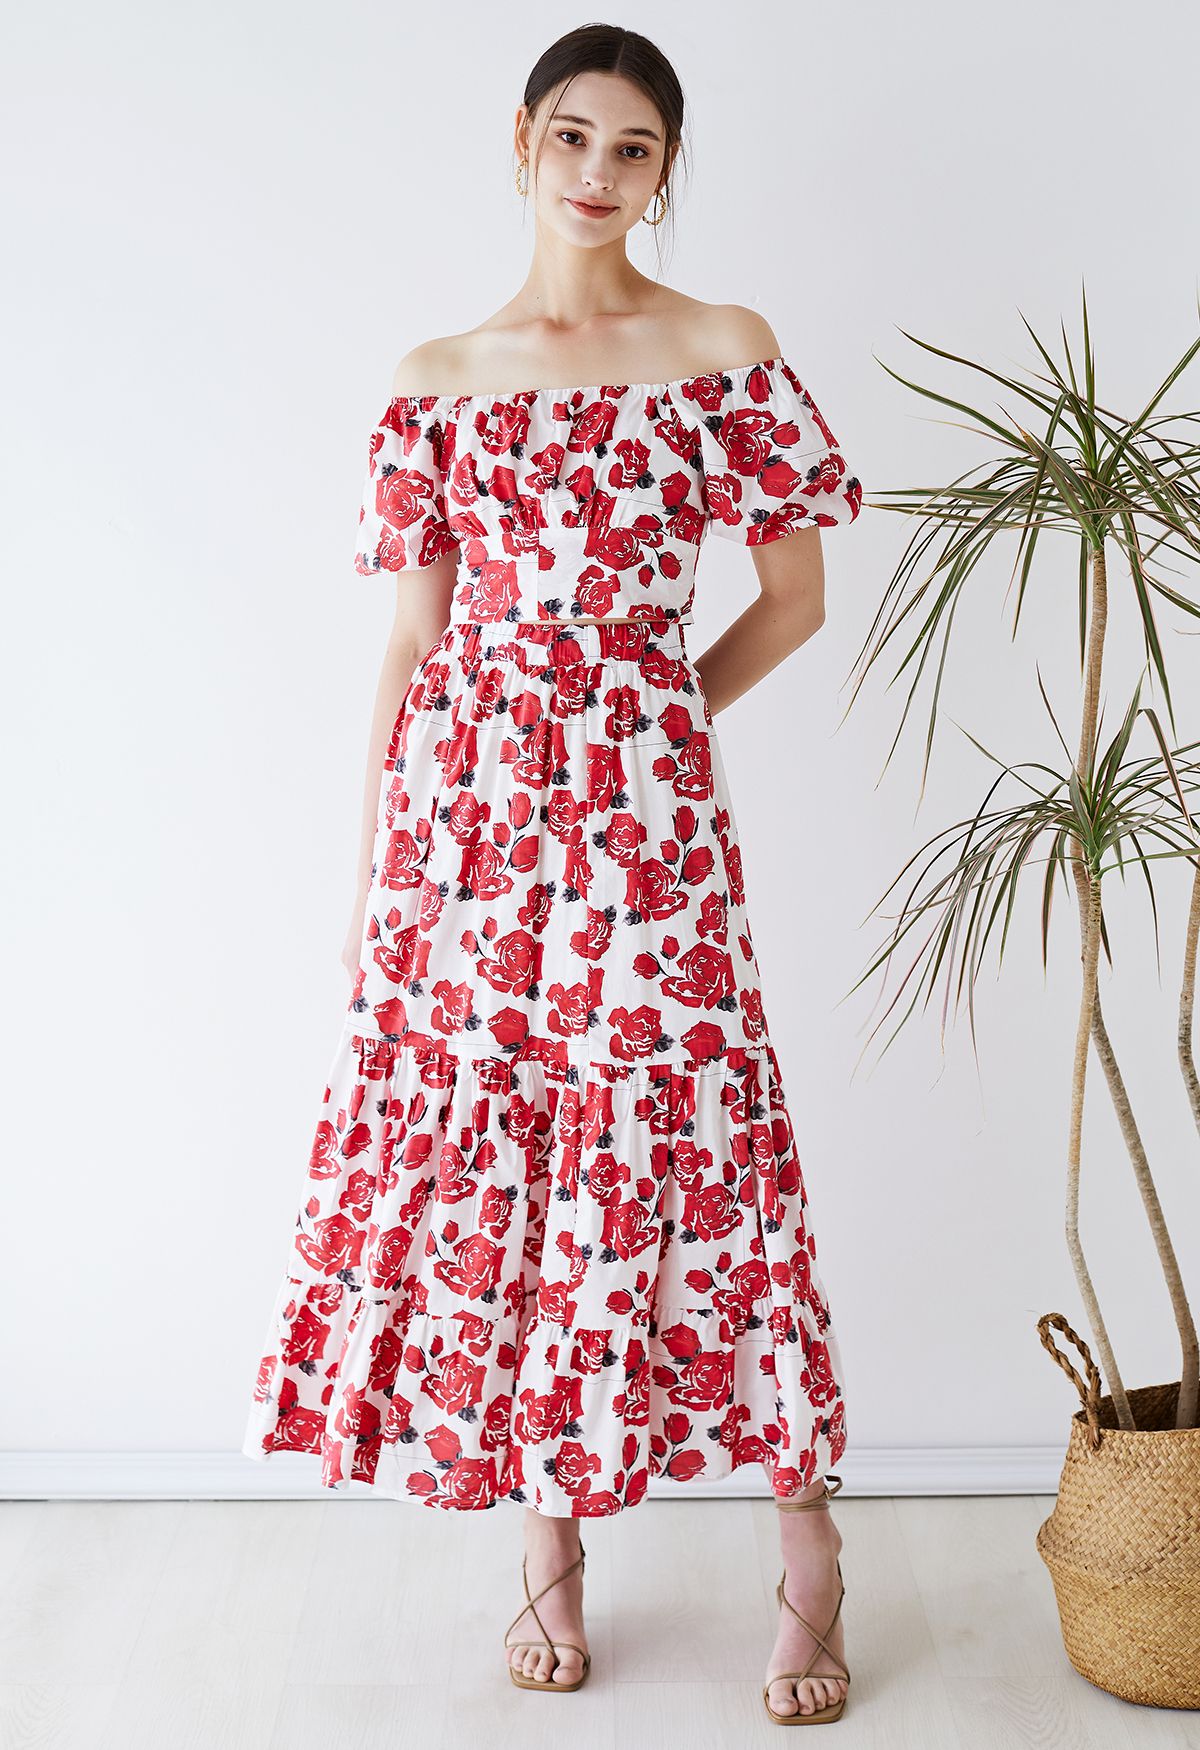 Off-Shoulder Bowknot Crop Top and Flare Skirt Set in Red Rose